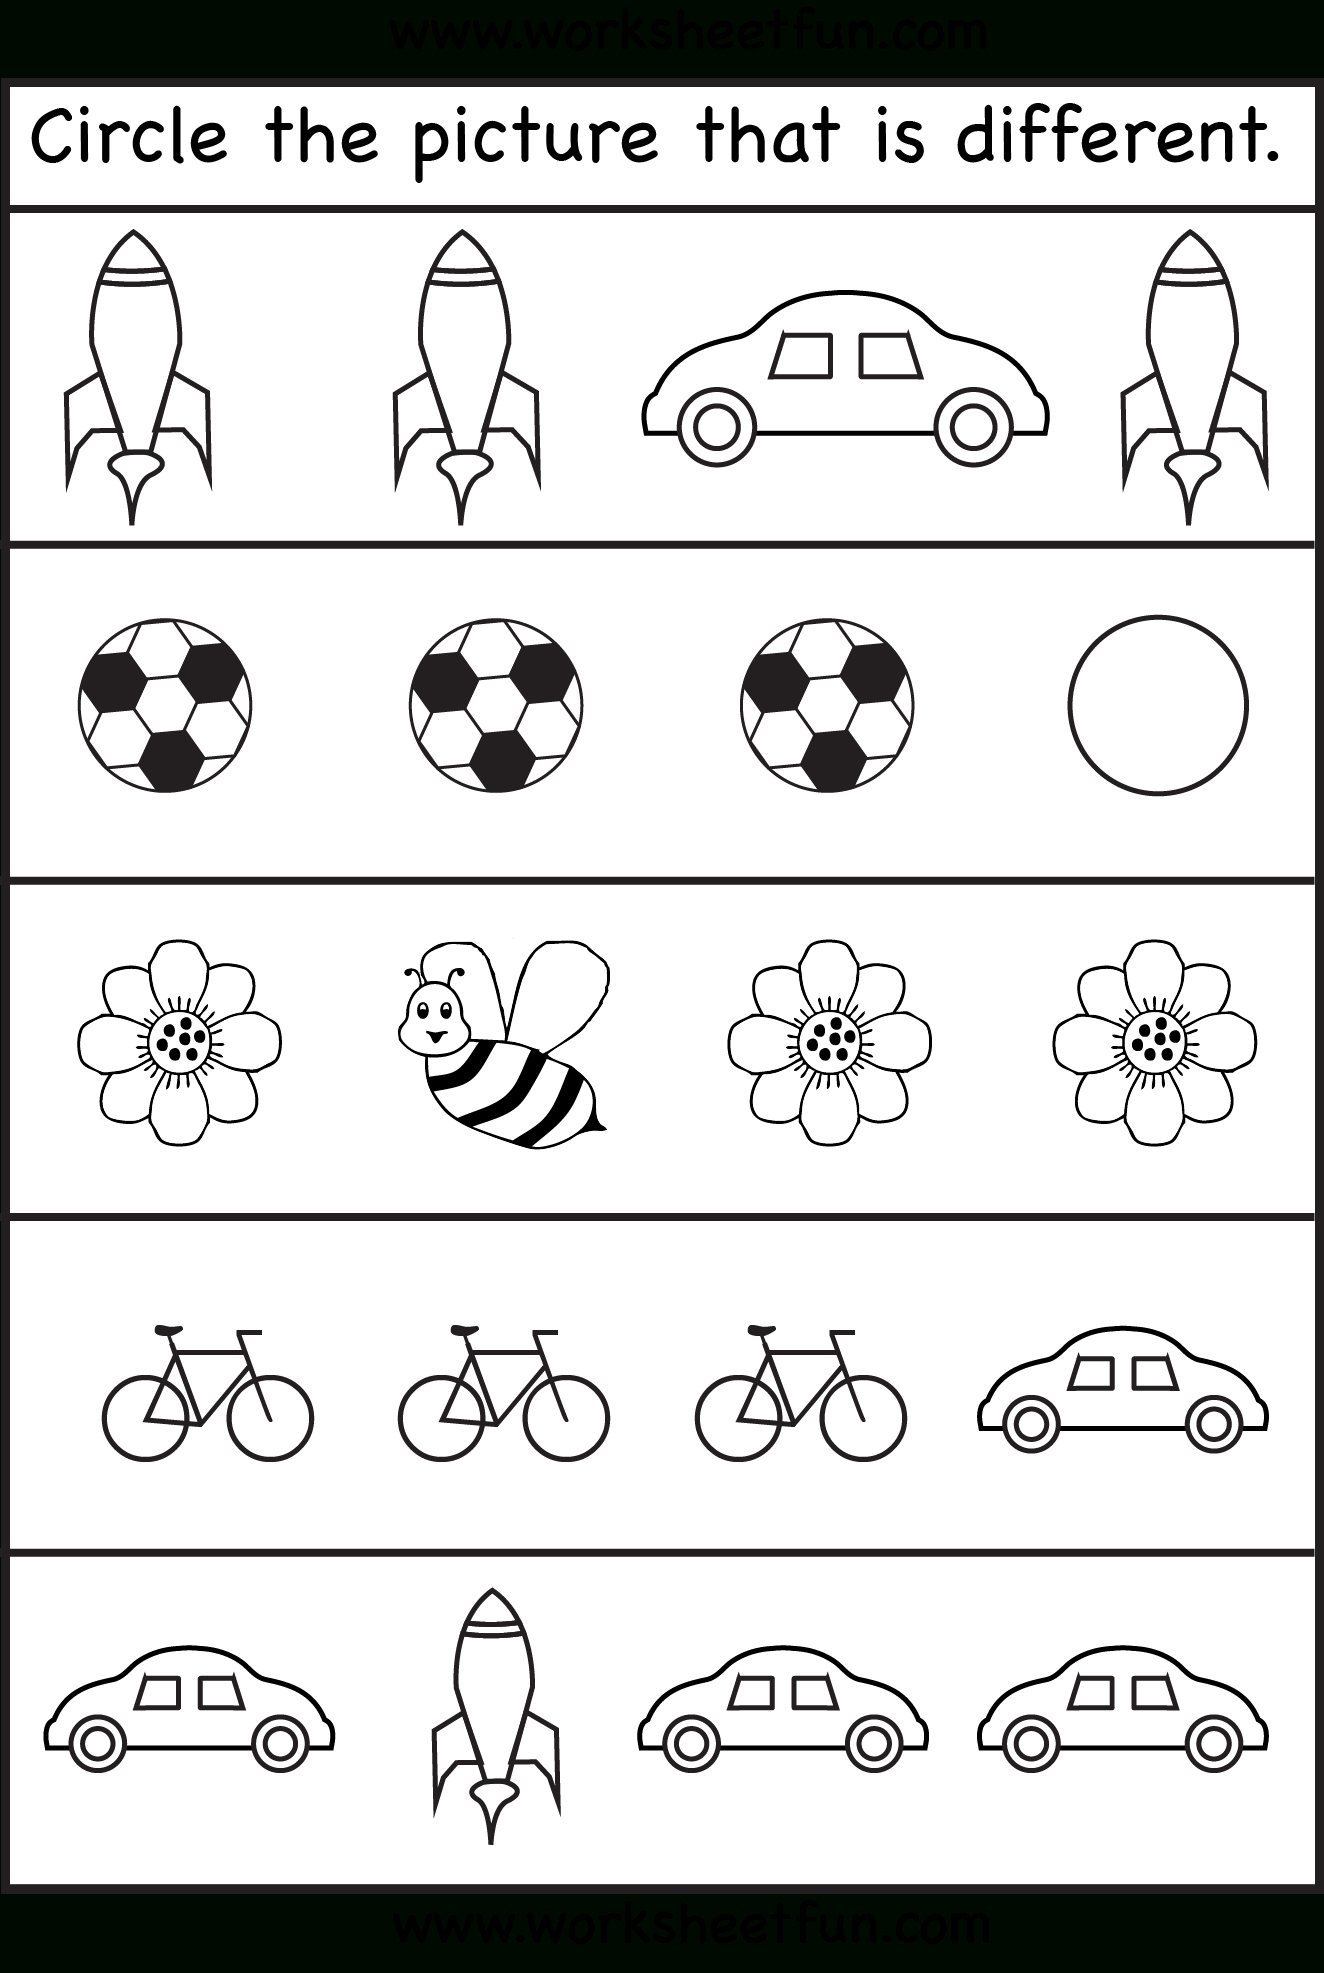 Circle The Picture That Is Different - 4 Worksheets | Autism - Free Printable Worksheets For 3 Year Olds